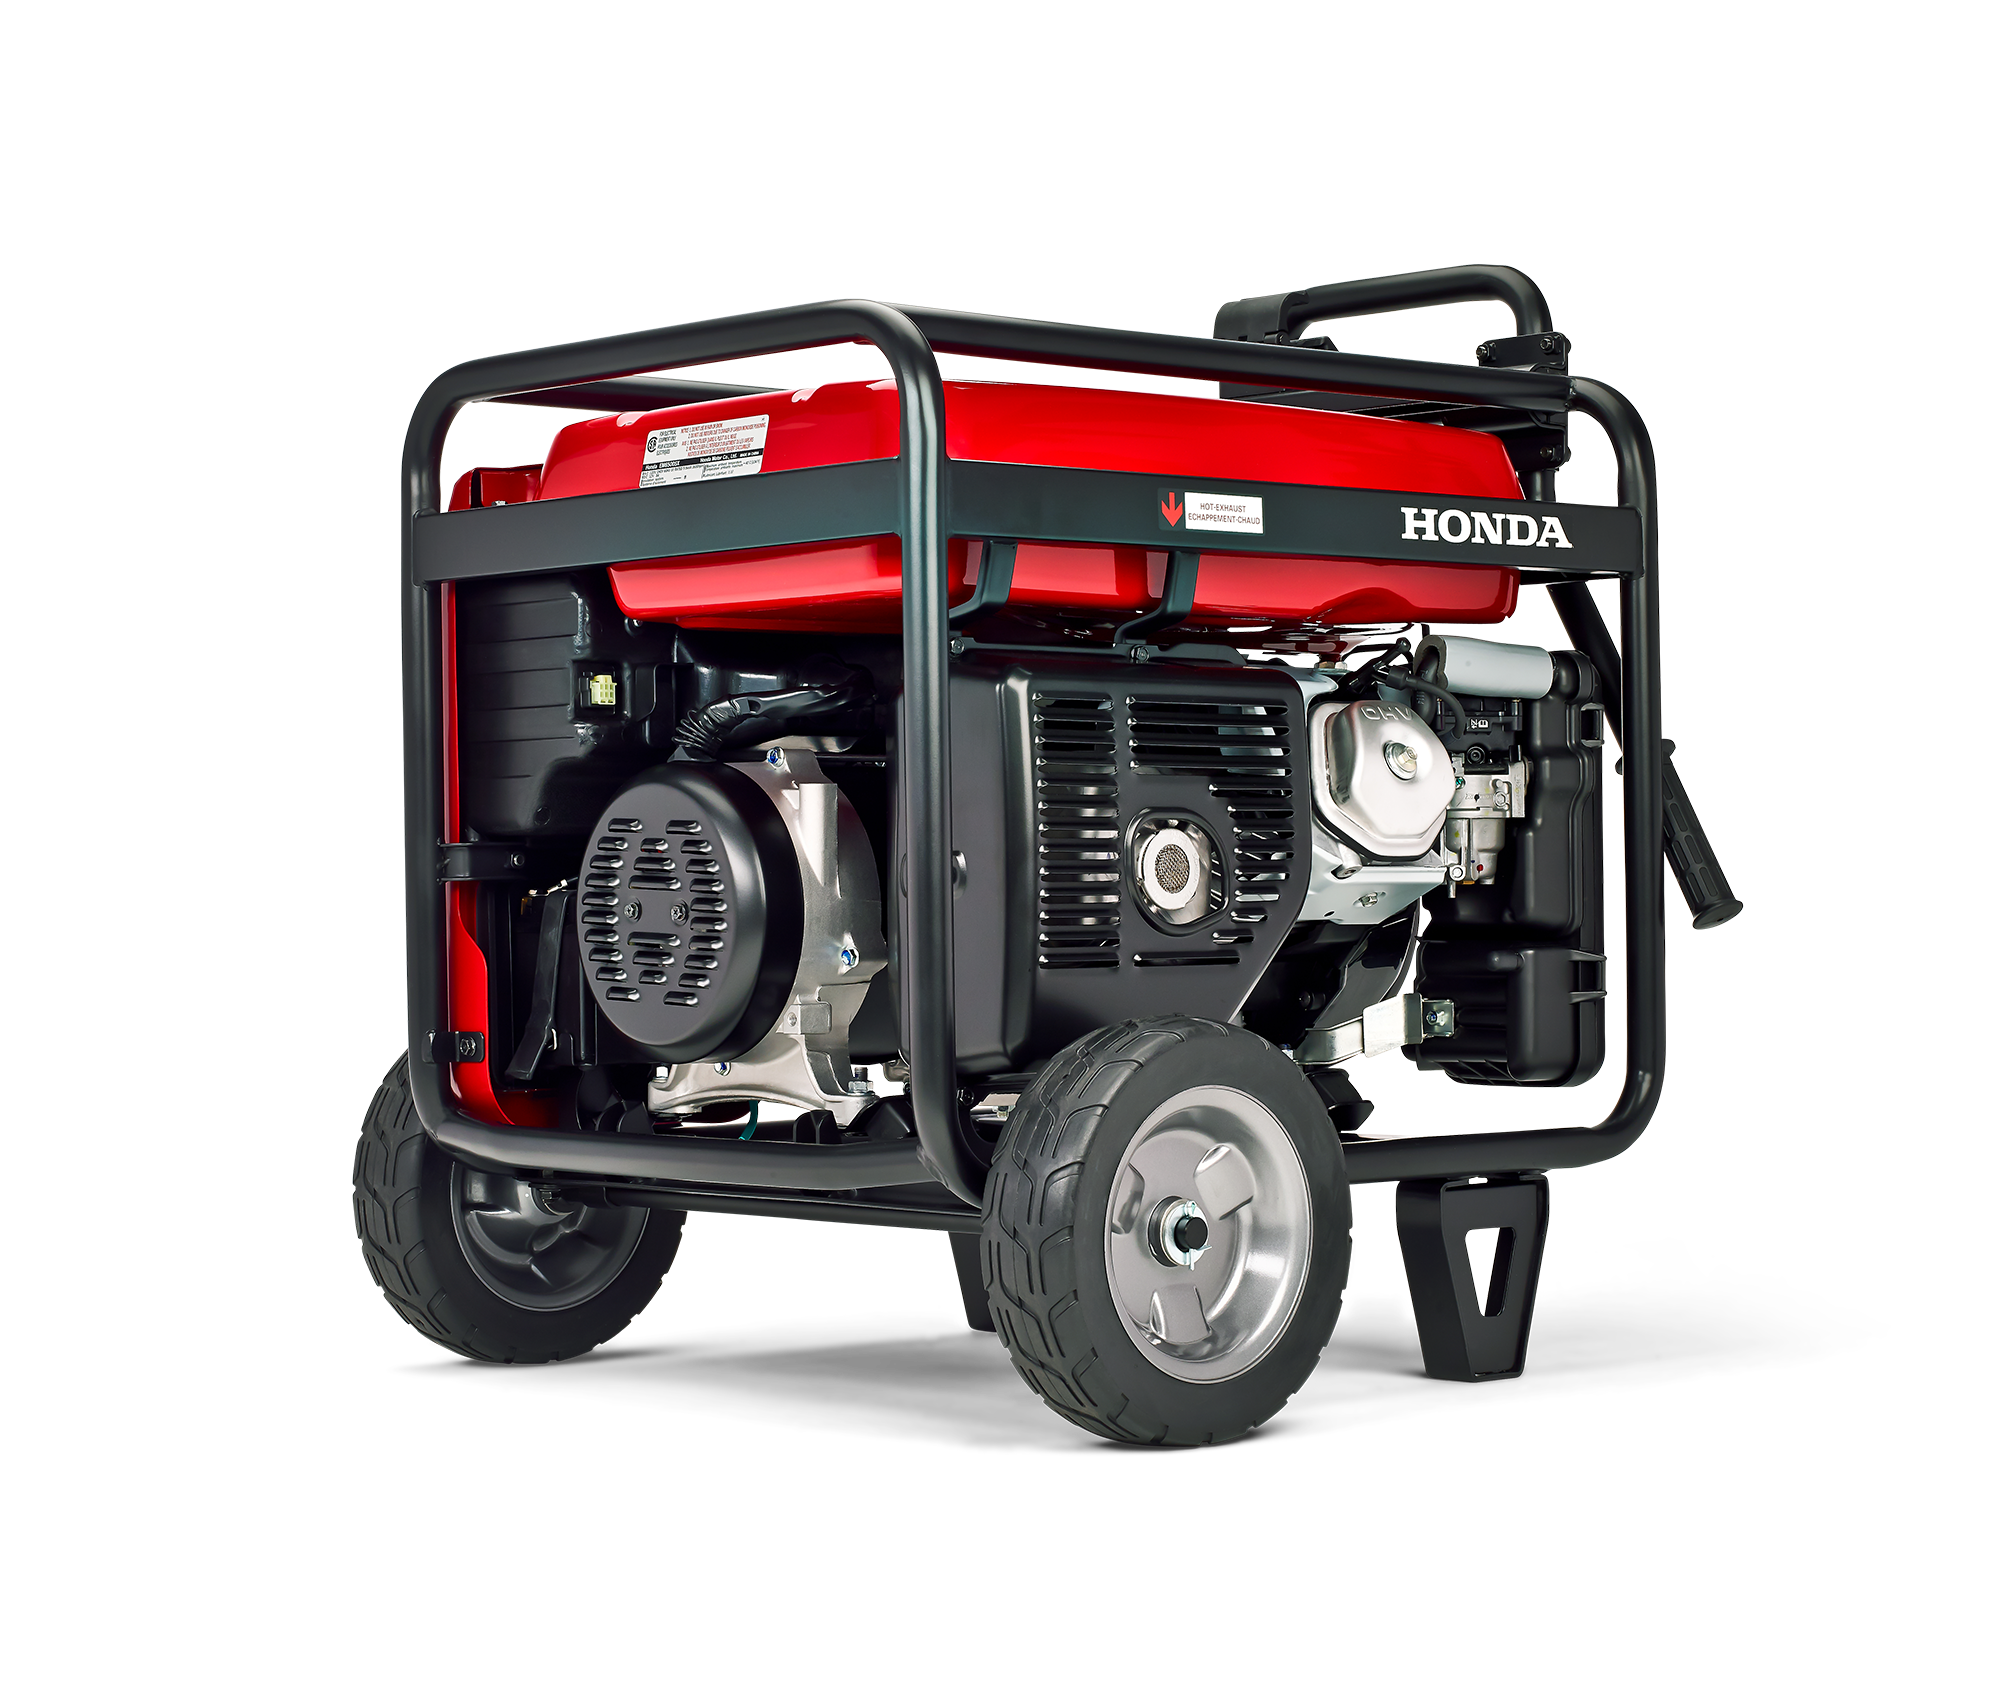 Image of the Electric Start 6500 generator